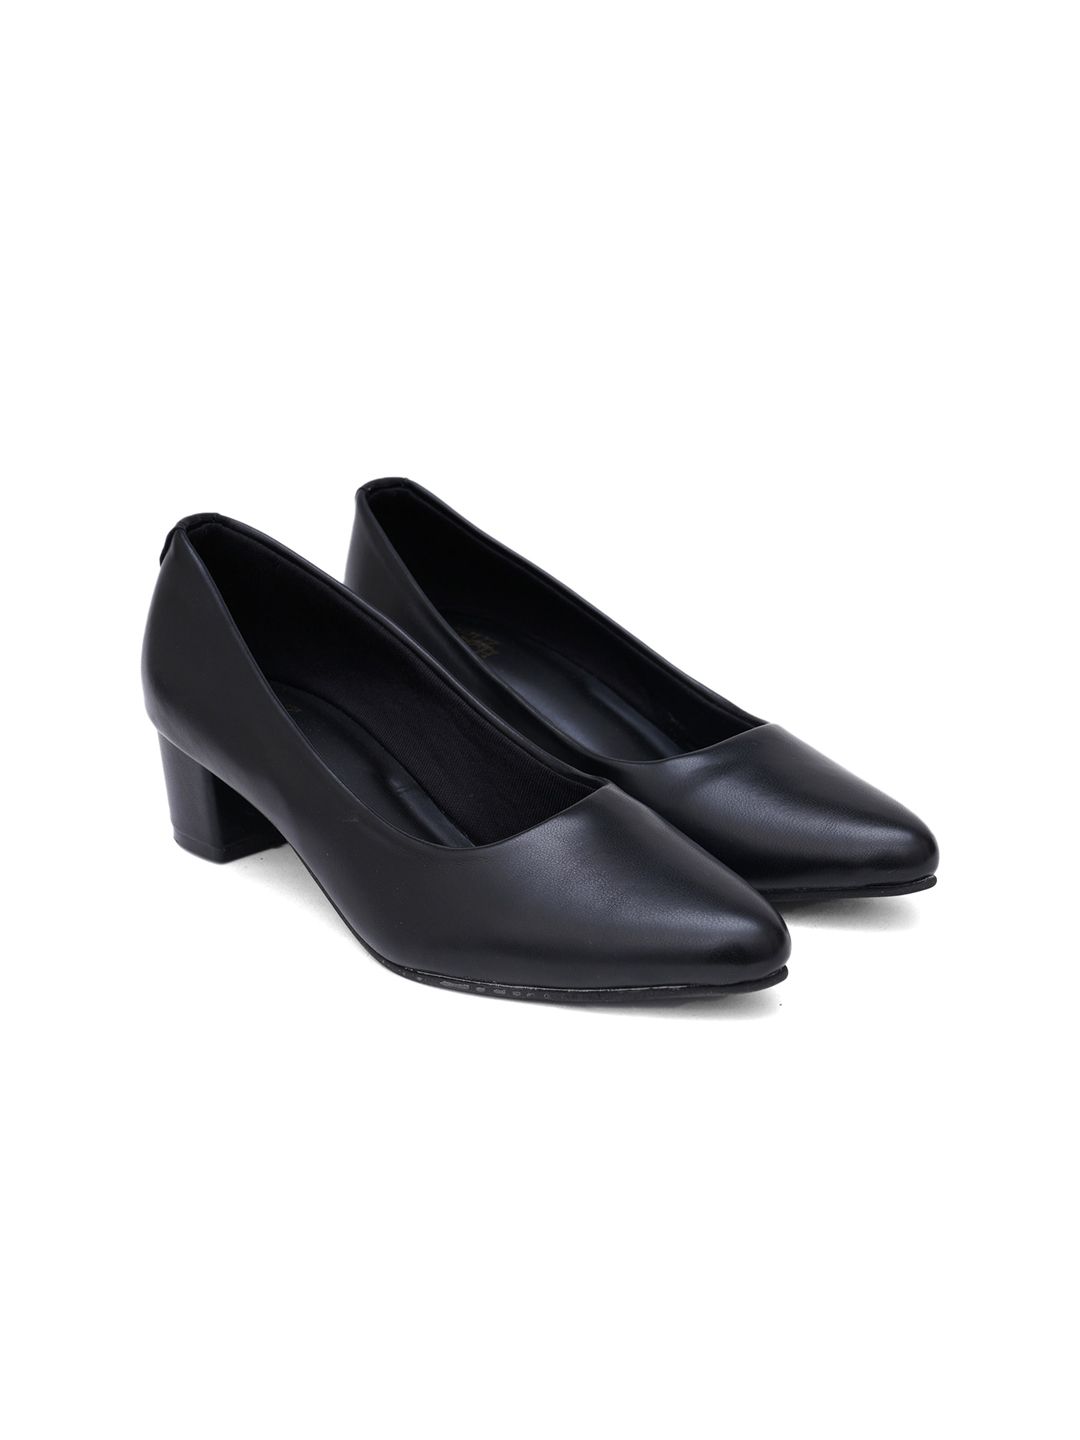 SHUZ TOUCH Black Block Pumps Price in India